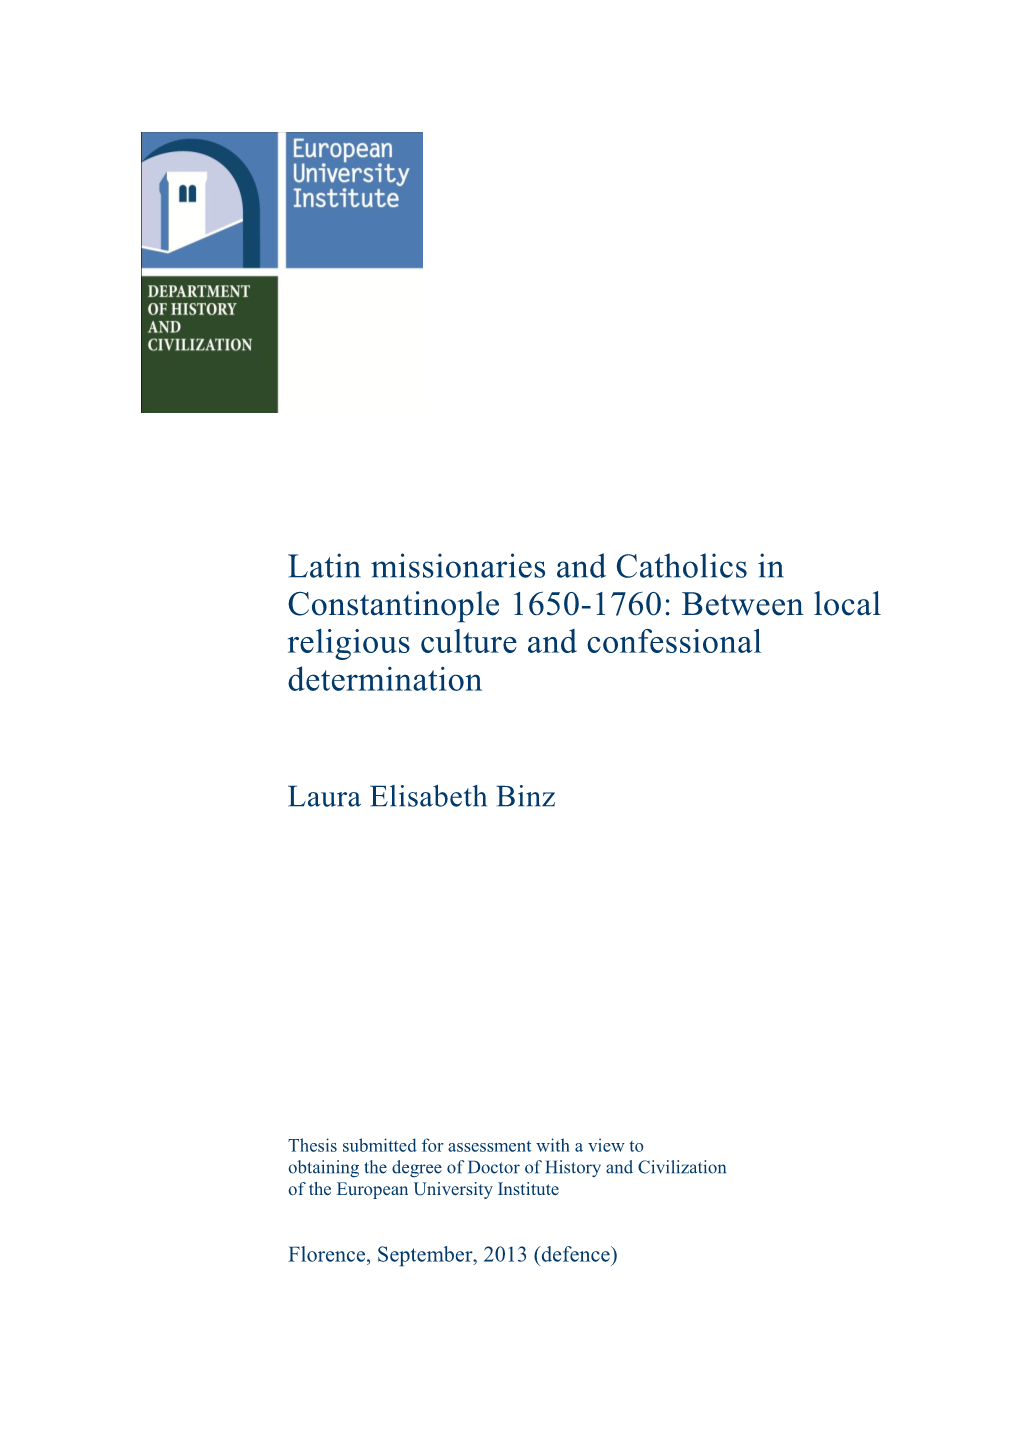 Latin Missionaries and Catholics in Constantinople 1650-1760: Between Local Religious Culture and Confessional Determination